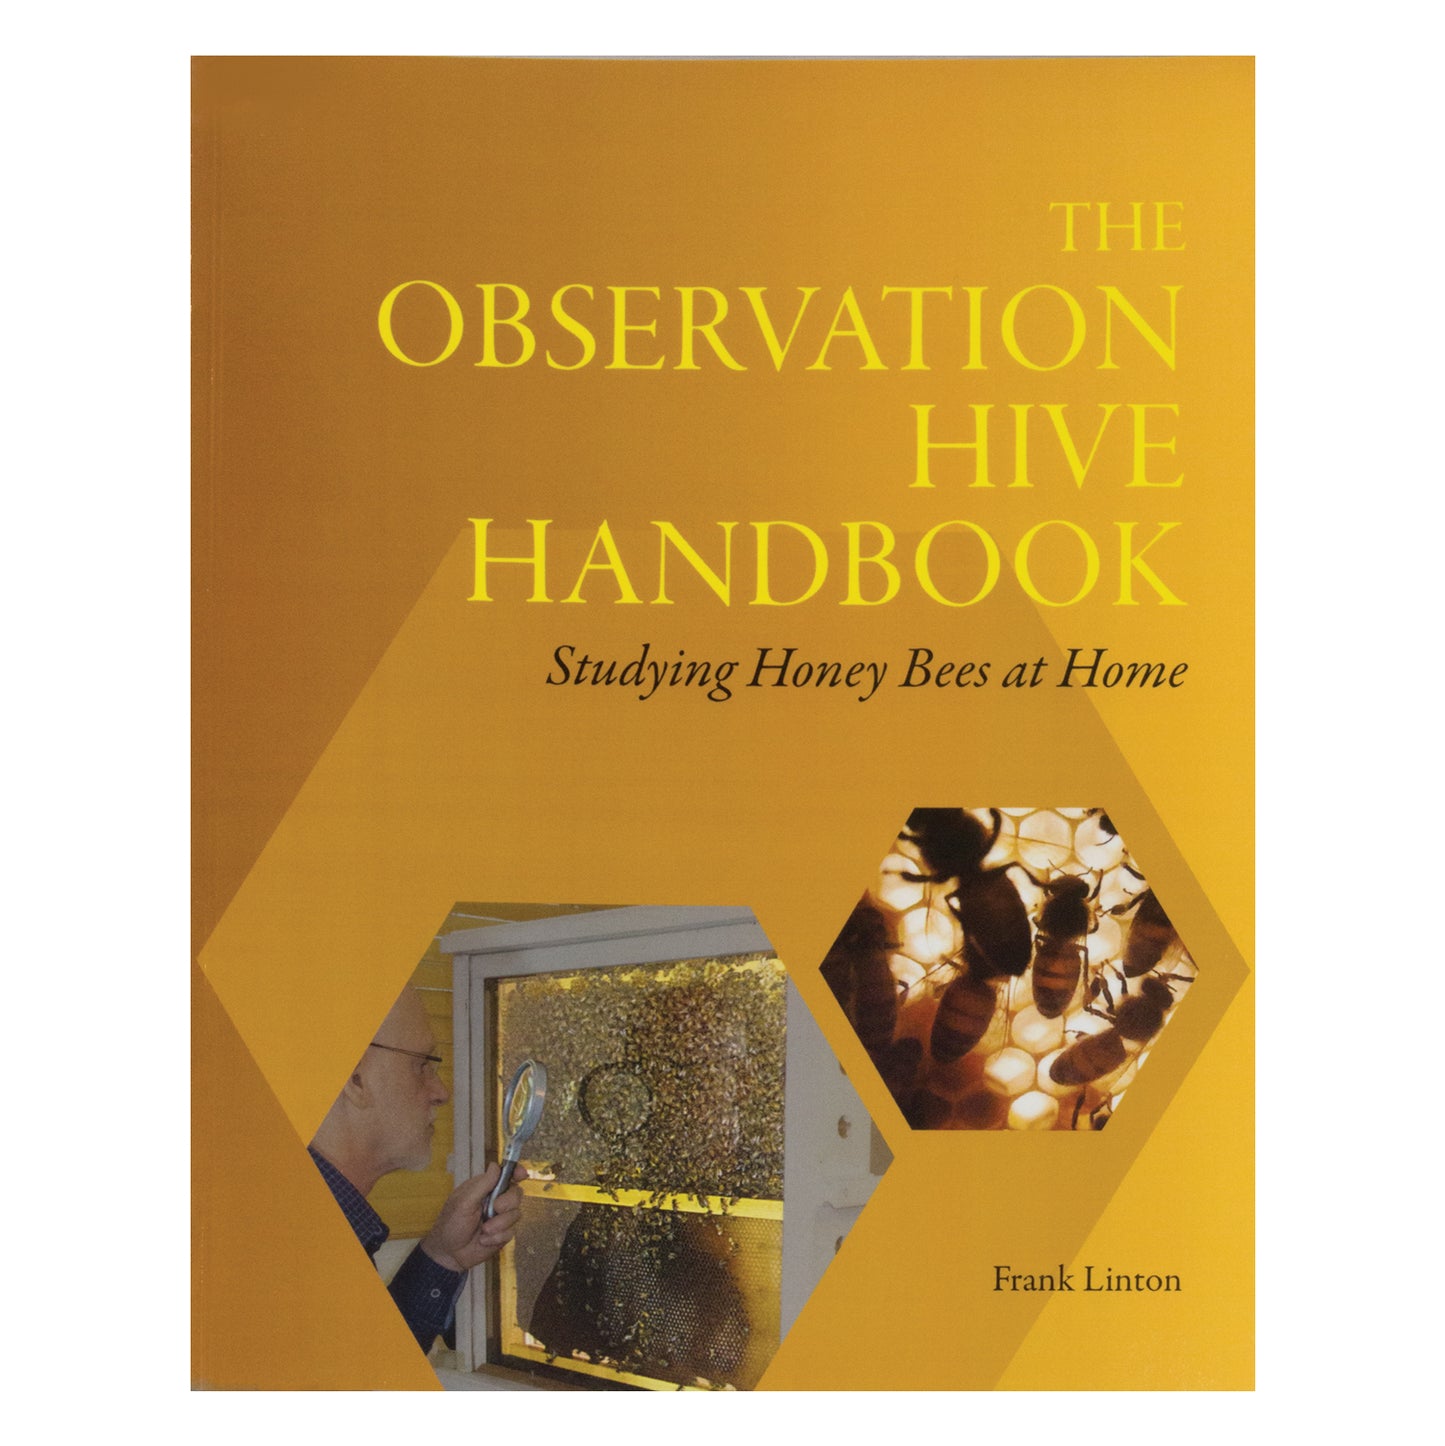 The Observation Hive Handbook